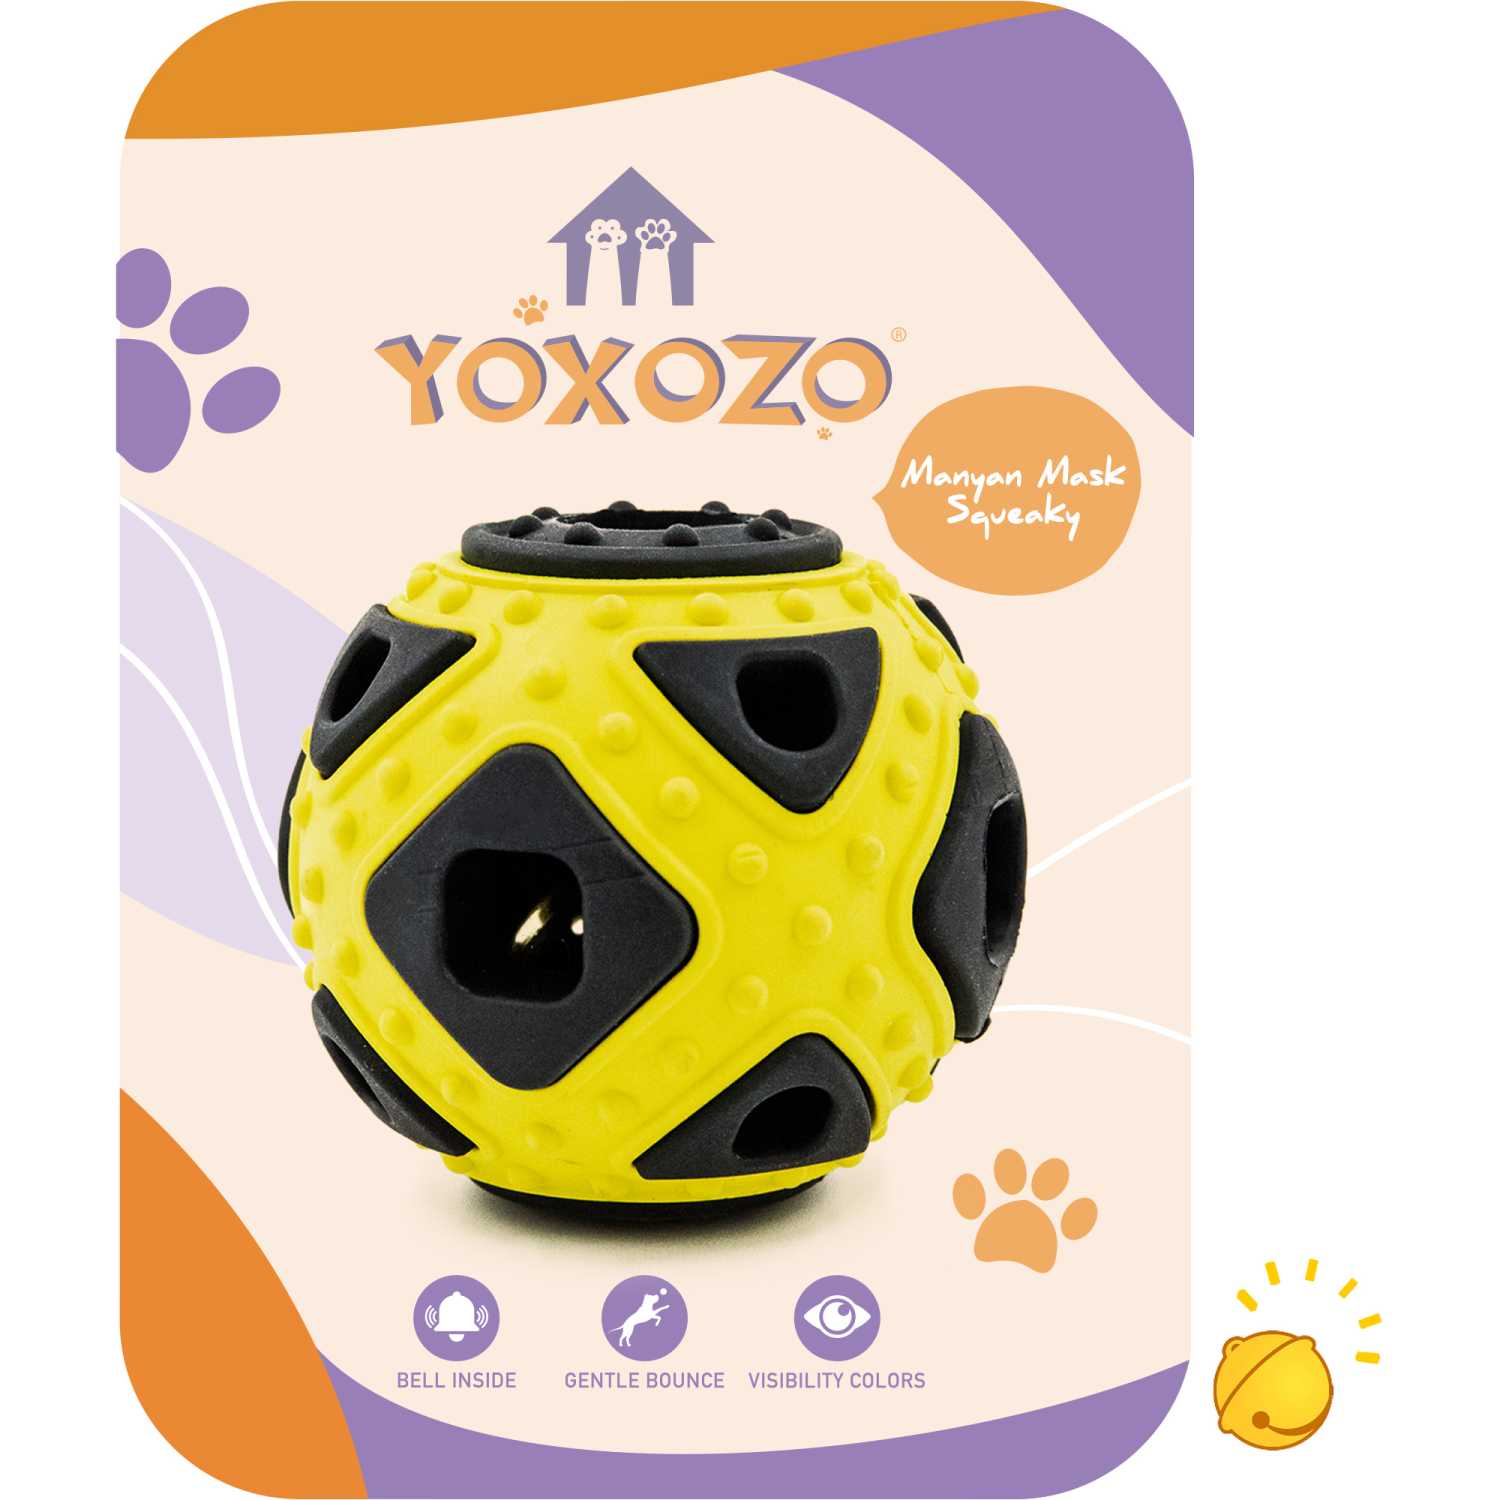 YOXOZO Dog Ball Toy, Jingle Bell Inside for Gift, Rubber Squeaky Toy, Interactive Smart Ball with Holes, Ideal for Puppies, Small, Medium and Blind Dogs, 2.5 Inch (Yellow Black)